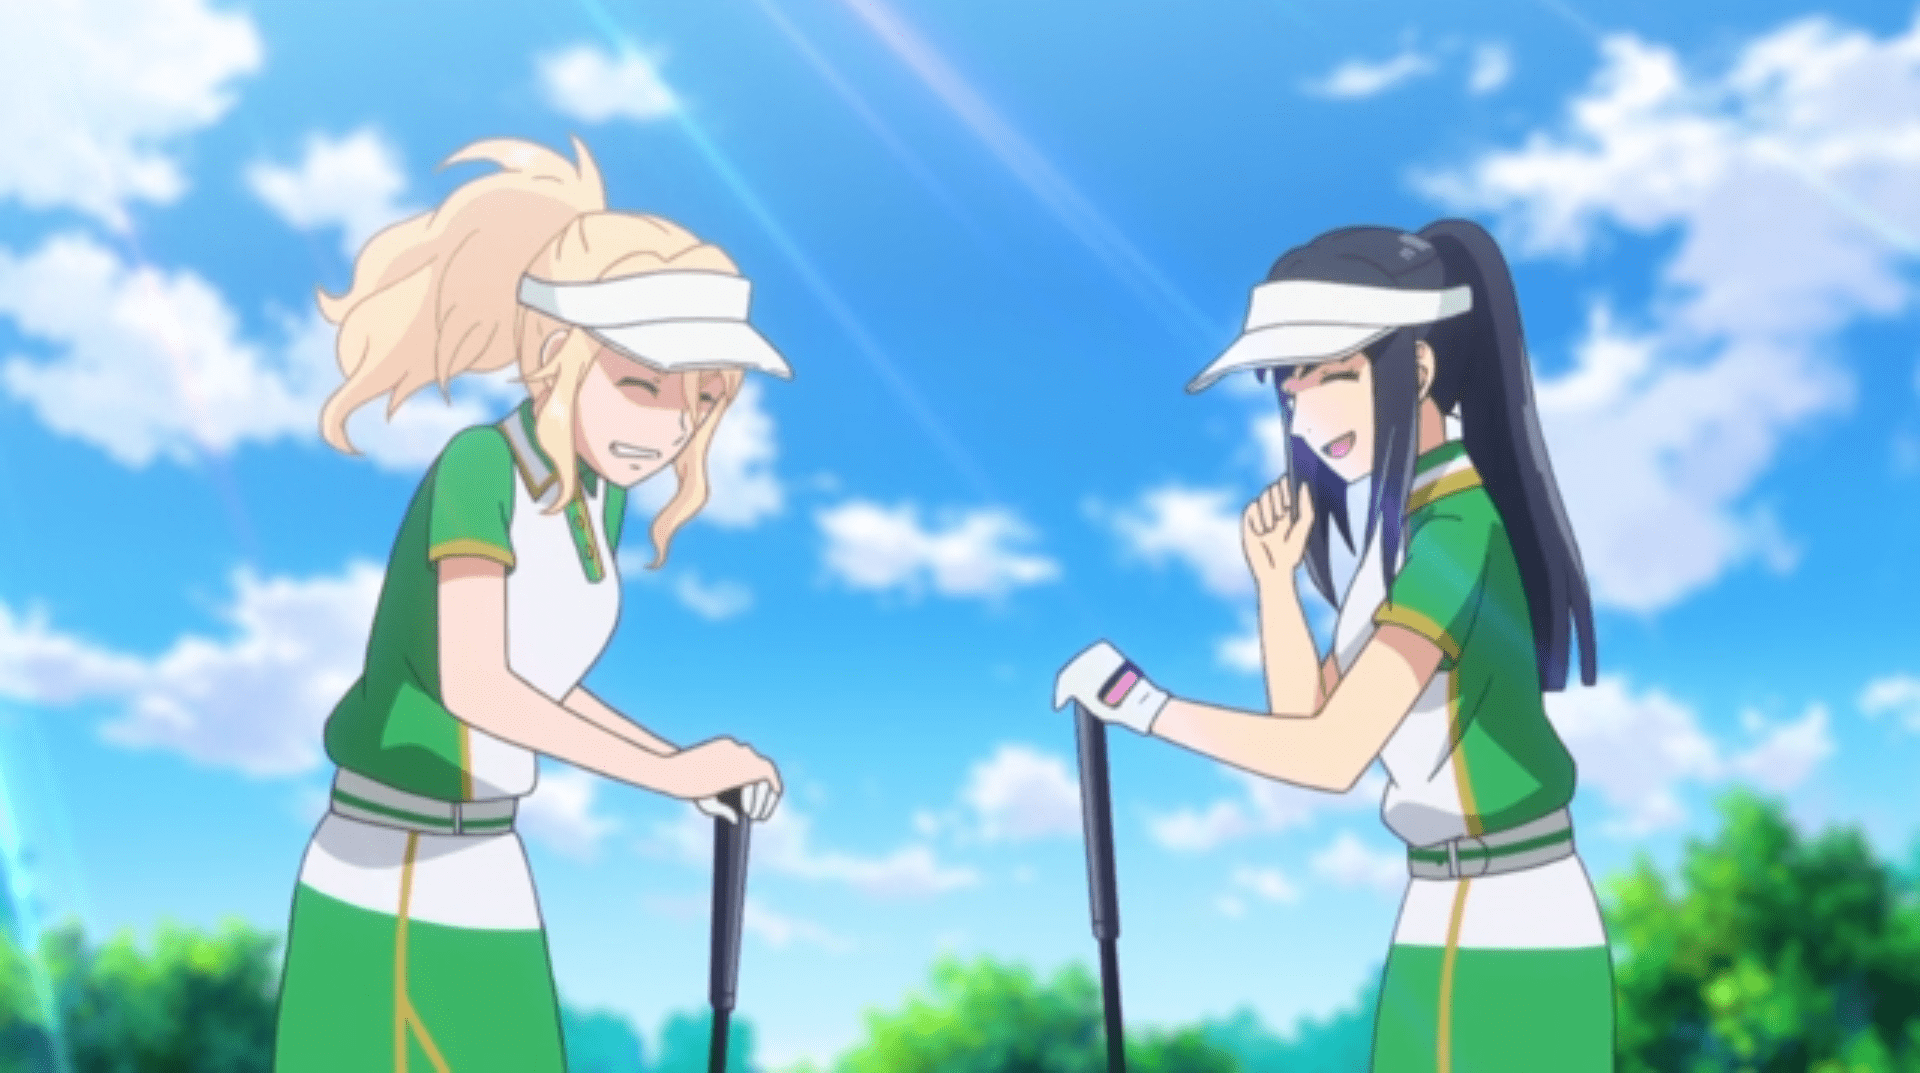 Birdie Wing”: A Golf Yuri Story Soaring to New Heights